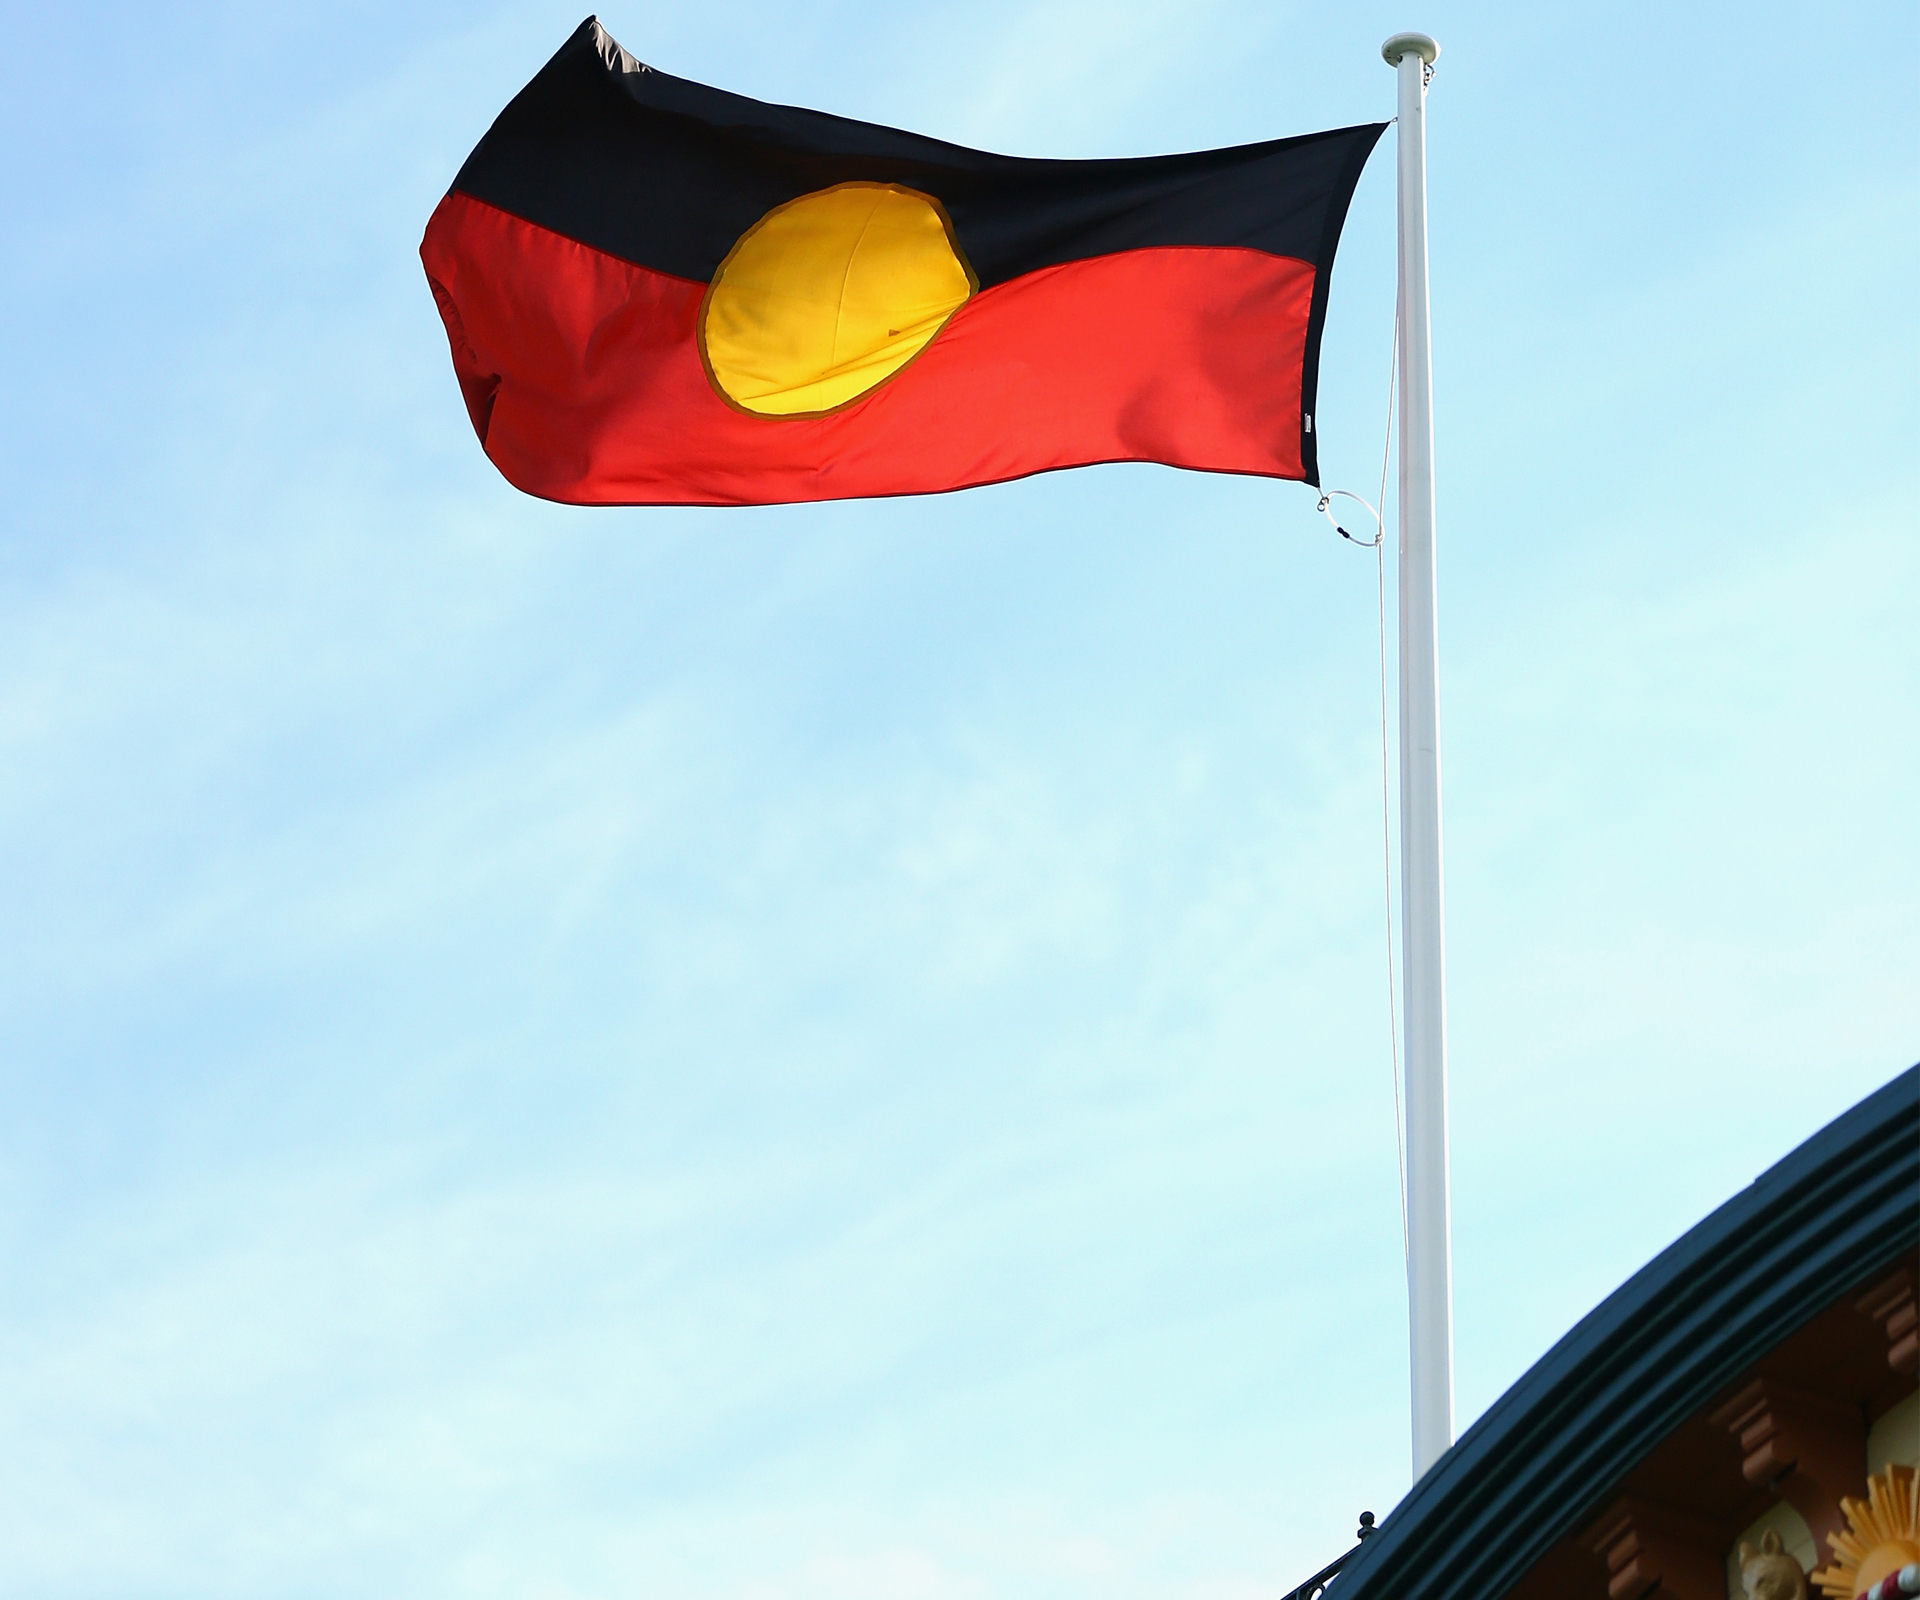 Aboriginal languages to become new HSC subject